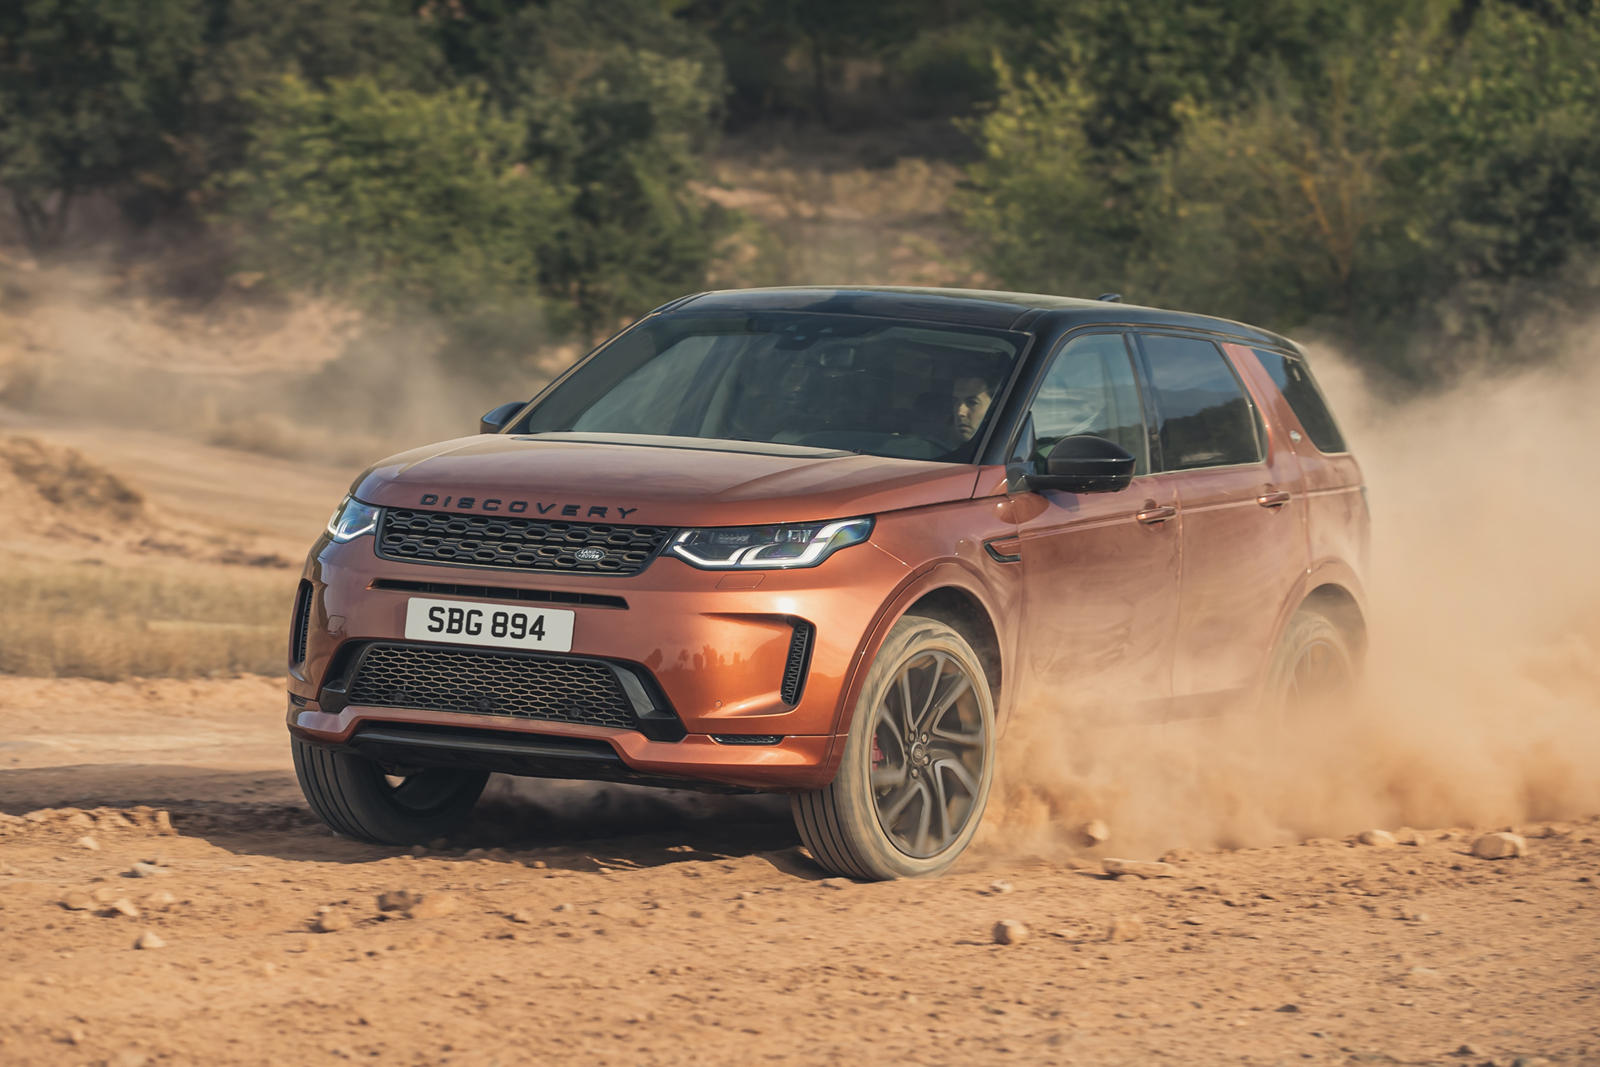 2018 Land Rover Discovery Sport Review & Ratings